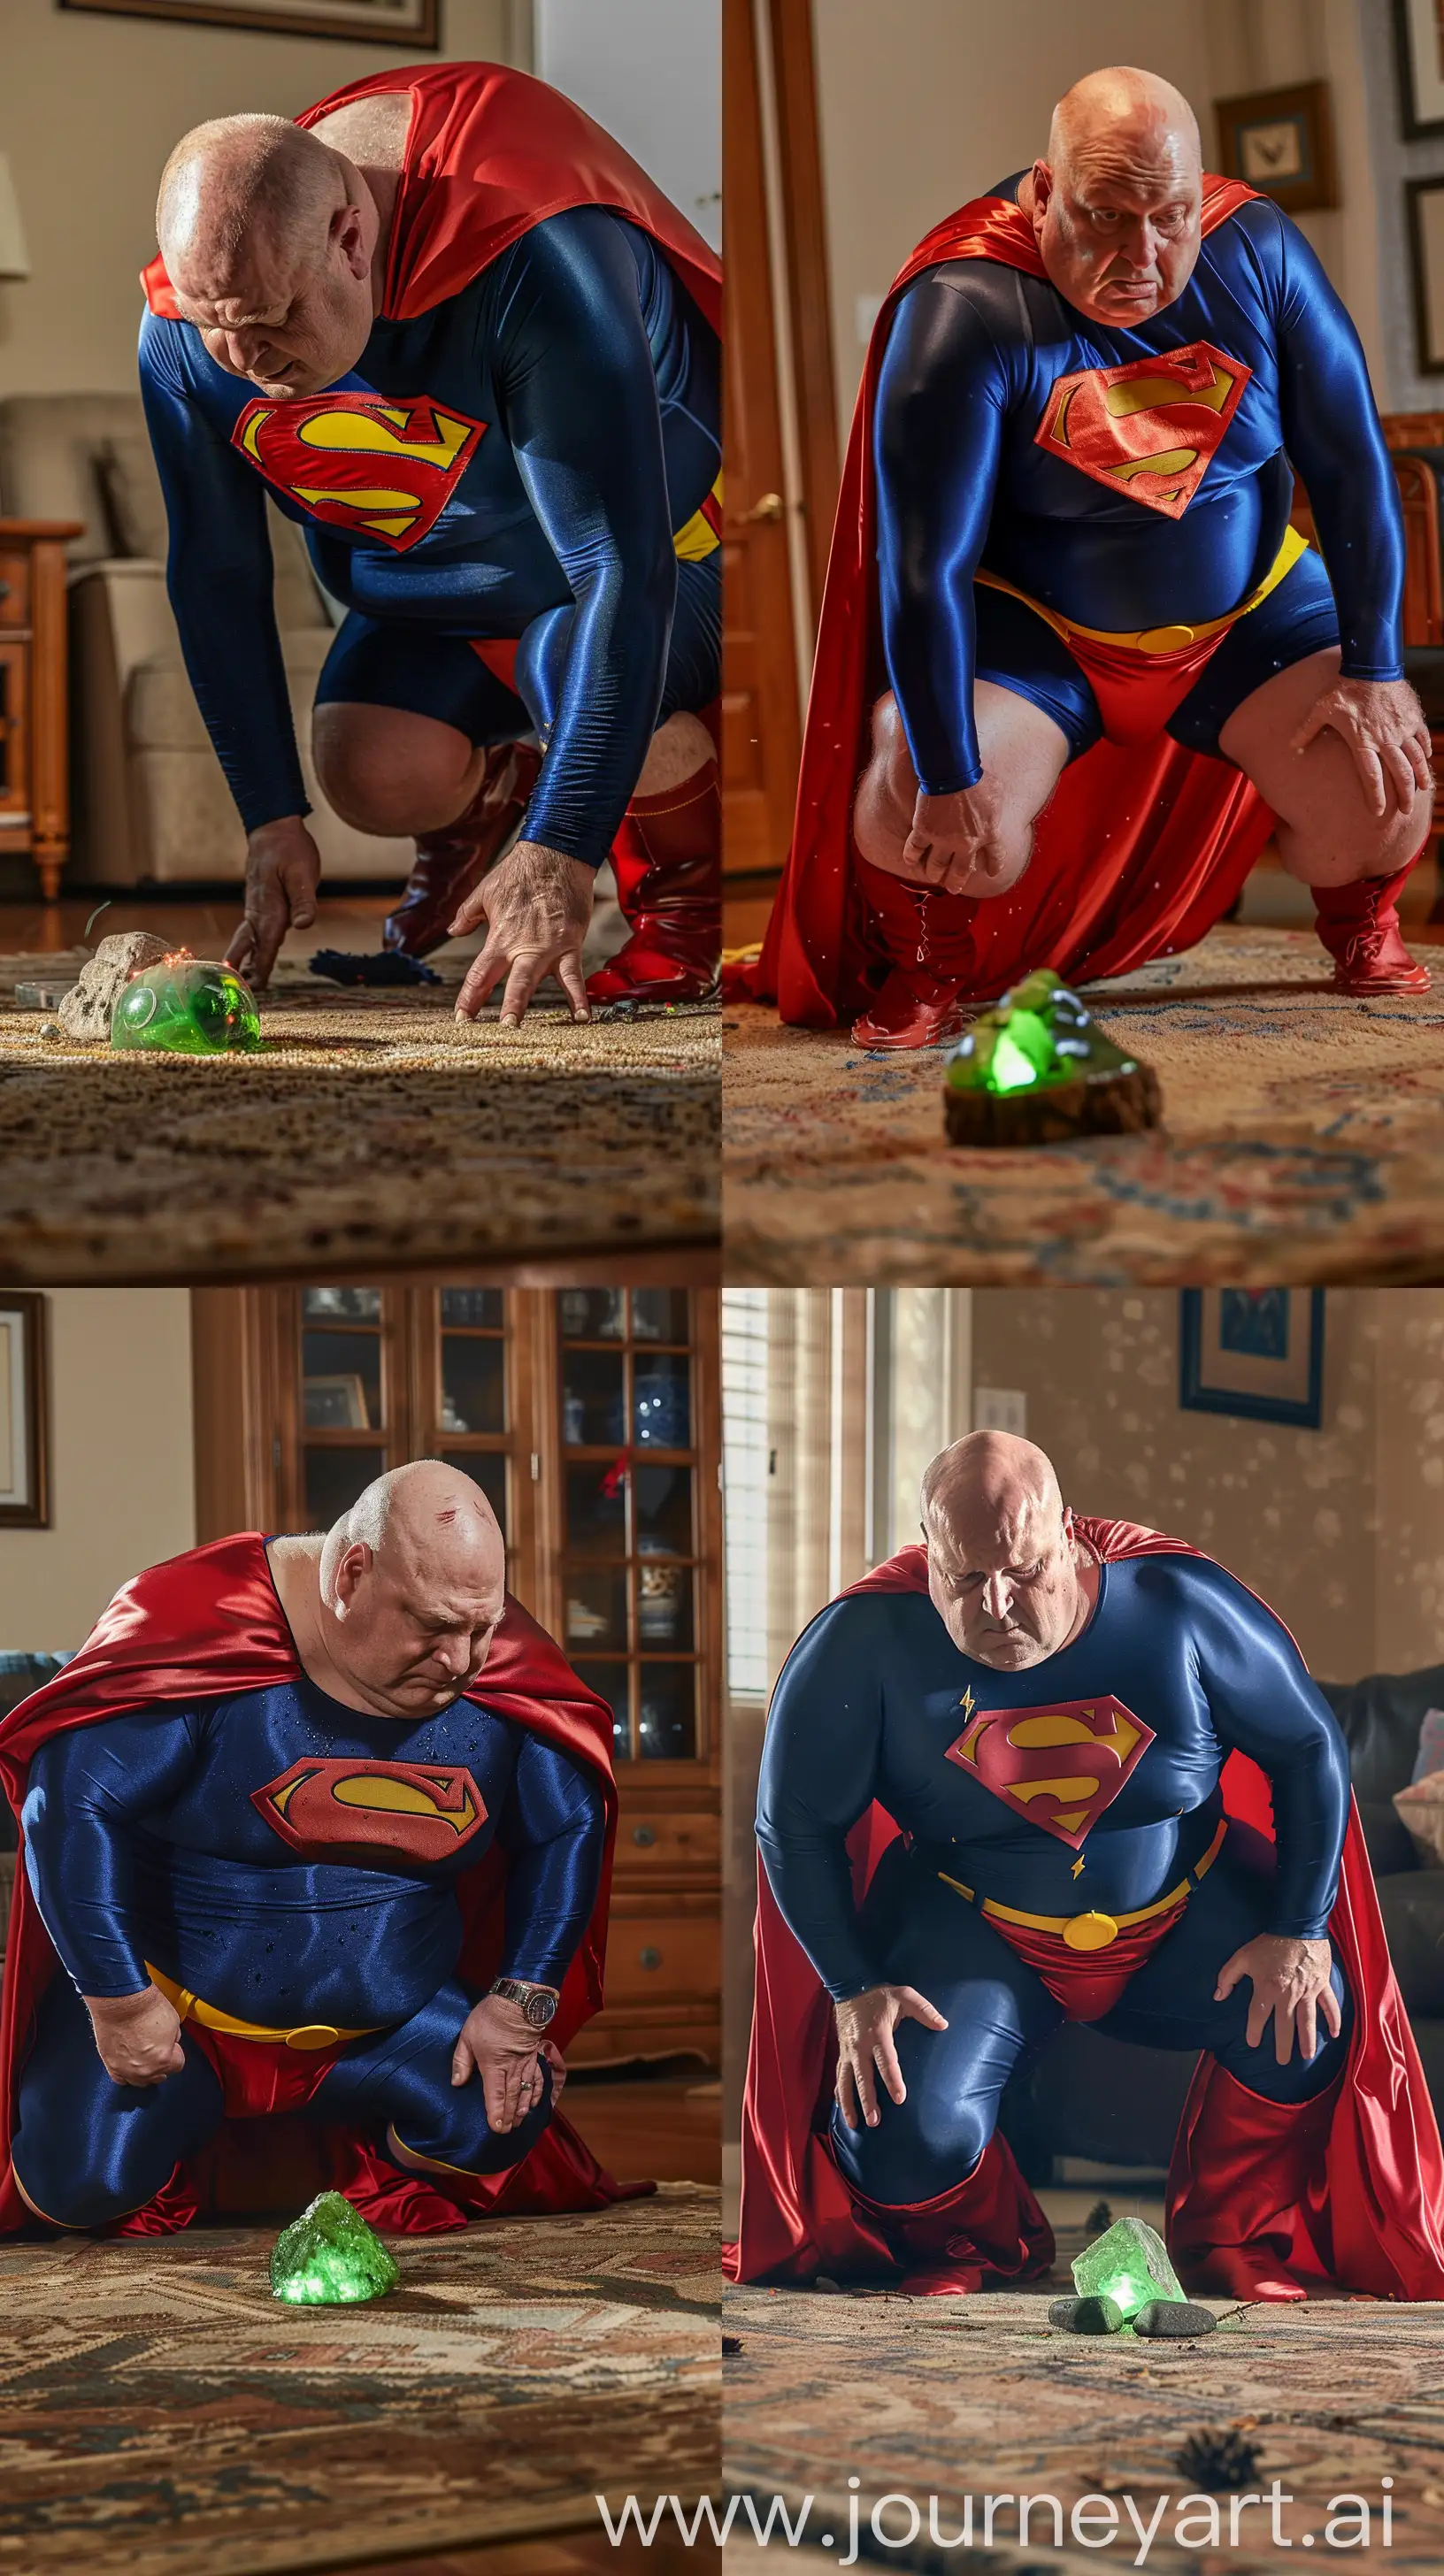 Exhausted-60YearOld-Man-in-Superman-Costume-with-Glowing-Rock